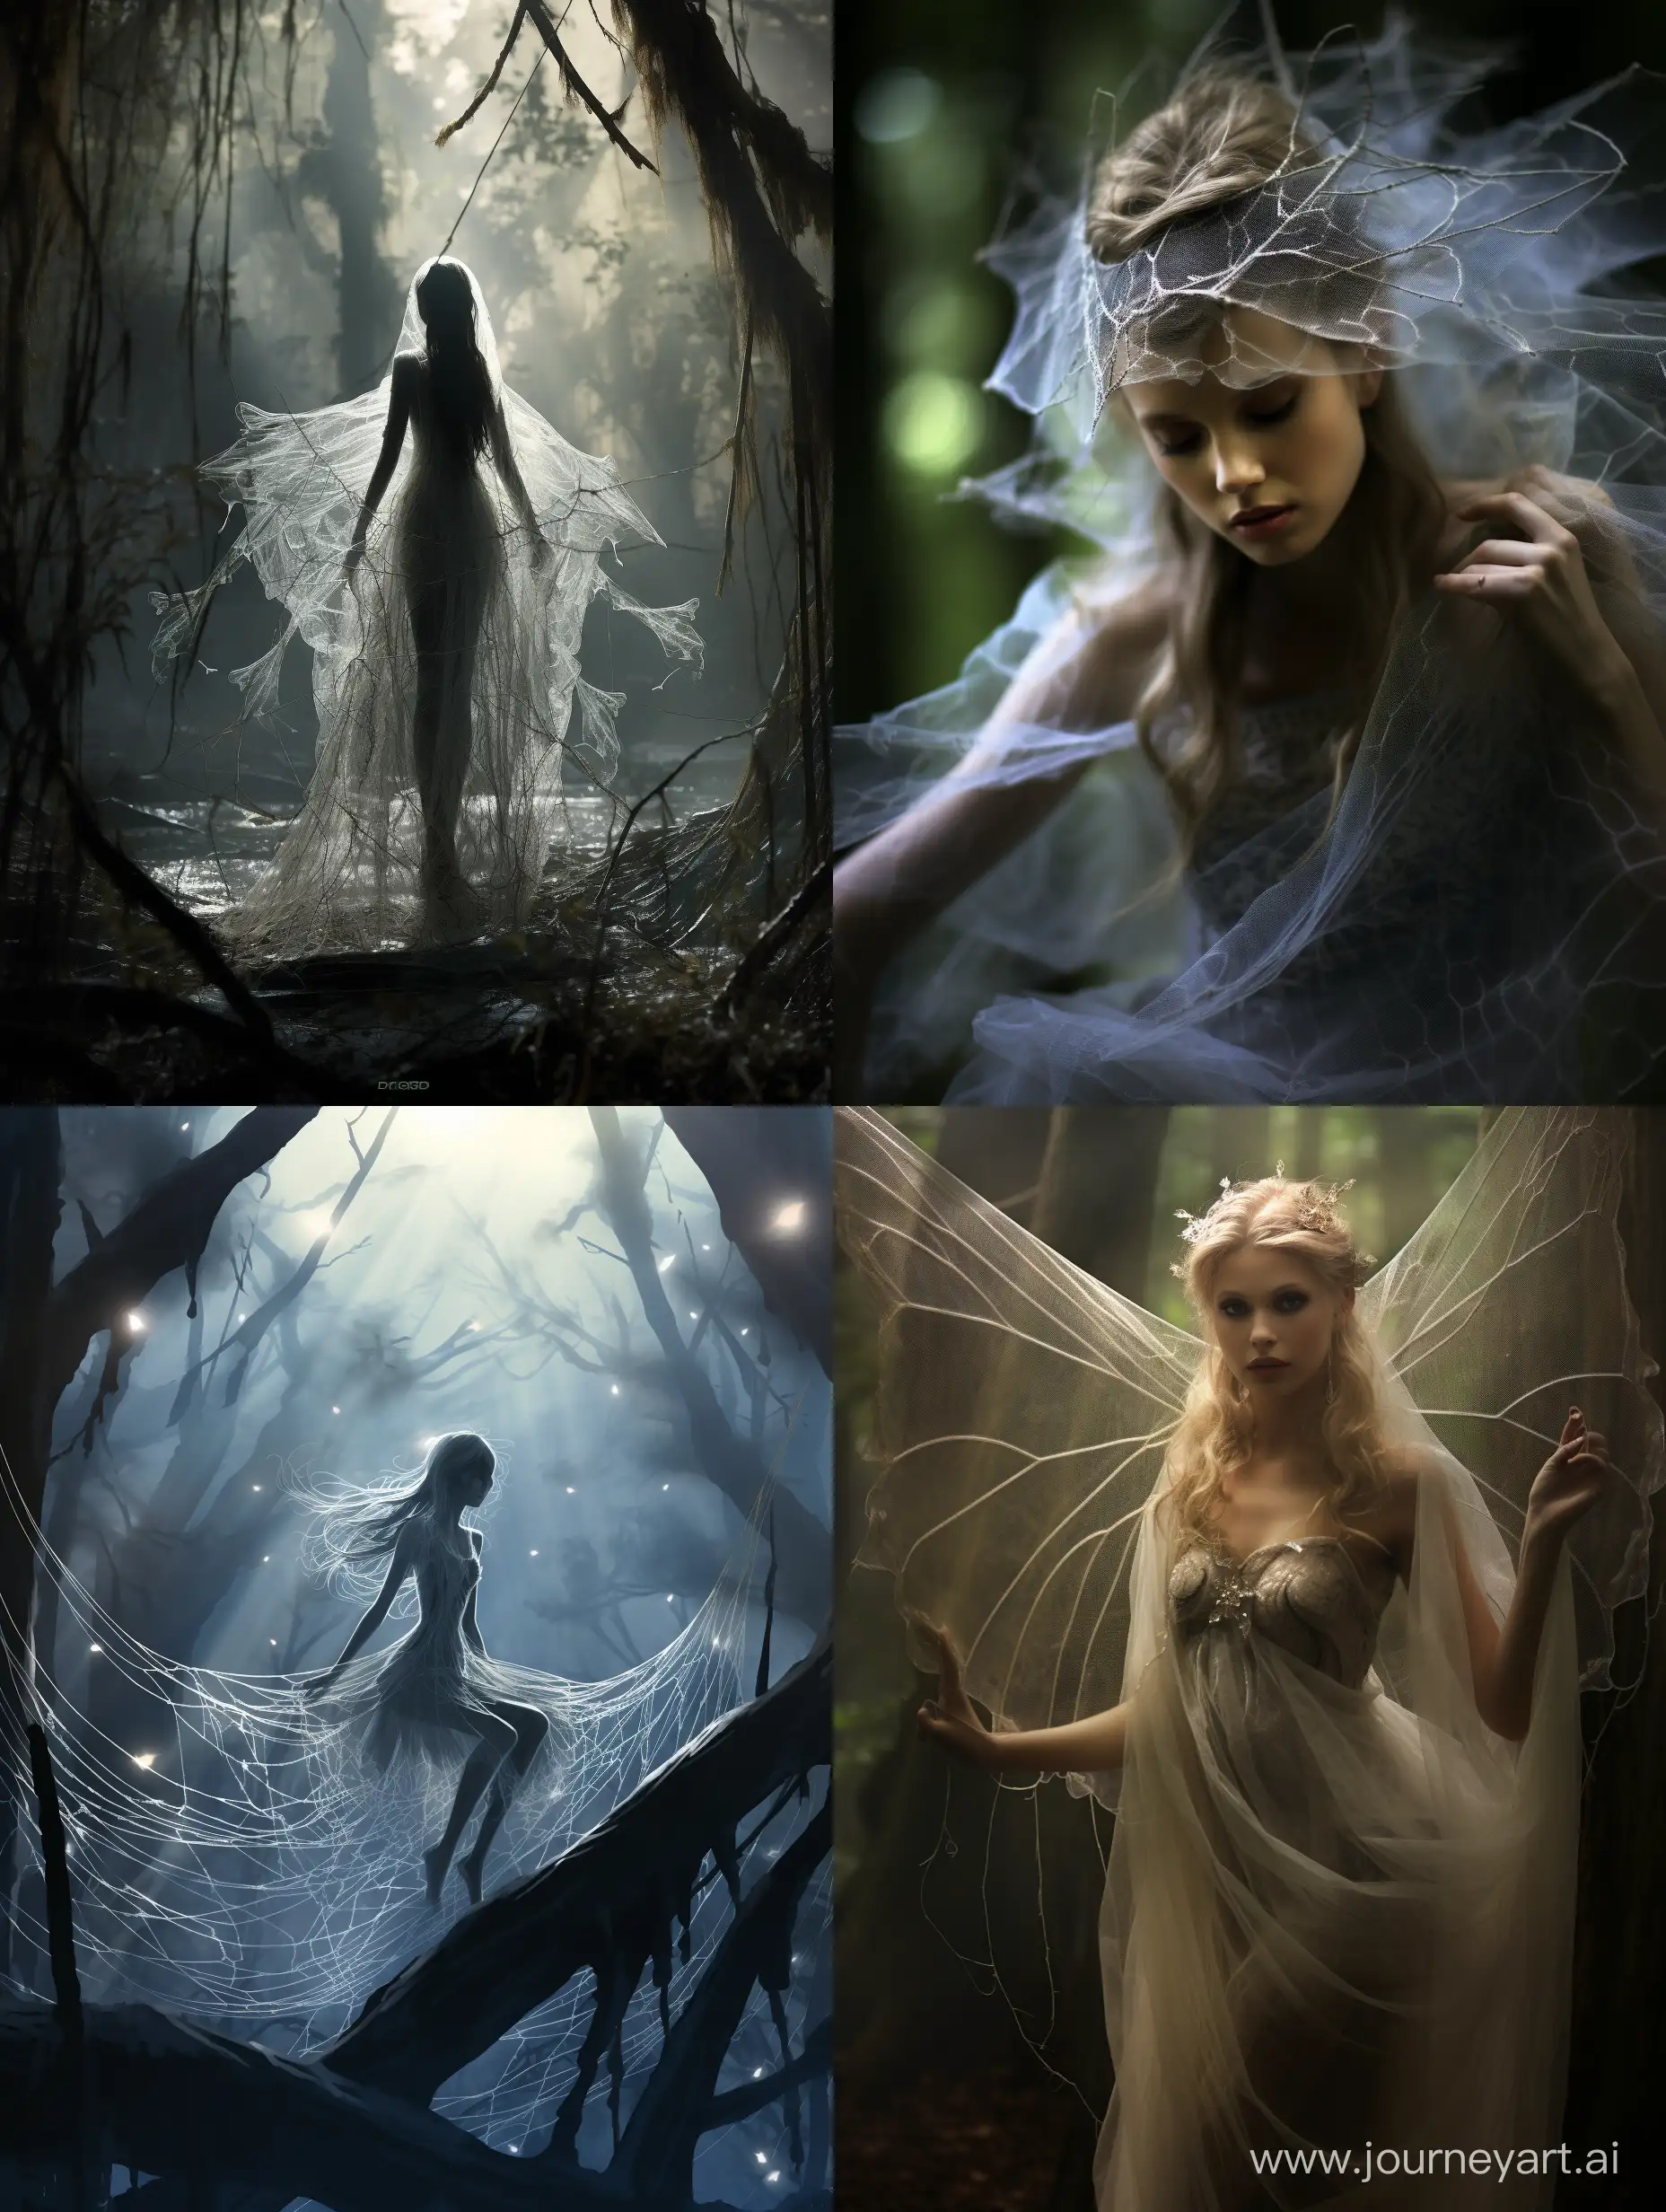 A sinister forest is cloaked in shadows as wisps of fog drift among the towering trees. At the center, a stunning winged fairy is ensnared within the intricate strands of a massive web, its silken threads wrapping her slender limbs. Though trapped, her beauty remains, from her delicate features to her gossamer gown and shimmering butterfly wings. But danger lurks in the form of a monstrous spider slowly drawing nearer. 

Captured with a Nikon in a dramatic film noir style, this haunting scene unfolds before you with cinematic depth, atmosphere and contrast. Intricate textures showcase both the fairy's ethereal grace amid the web's chaotic complexity. Every minute detail, from wisps of hair to individual cobwebs, appears hyper-real through advanced lighting, composition and 3D digital artistry. Vibrant colors saturate the magical world before eclipsing into shadows, as the fairy's plight intensifies towards an epic climactic confrontation.